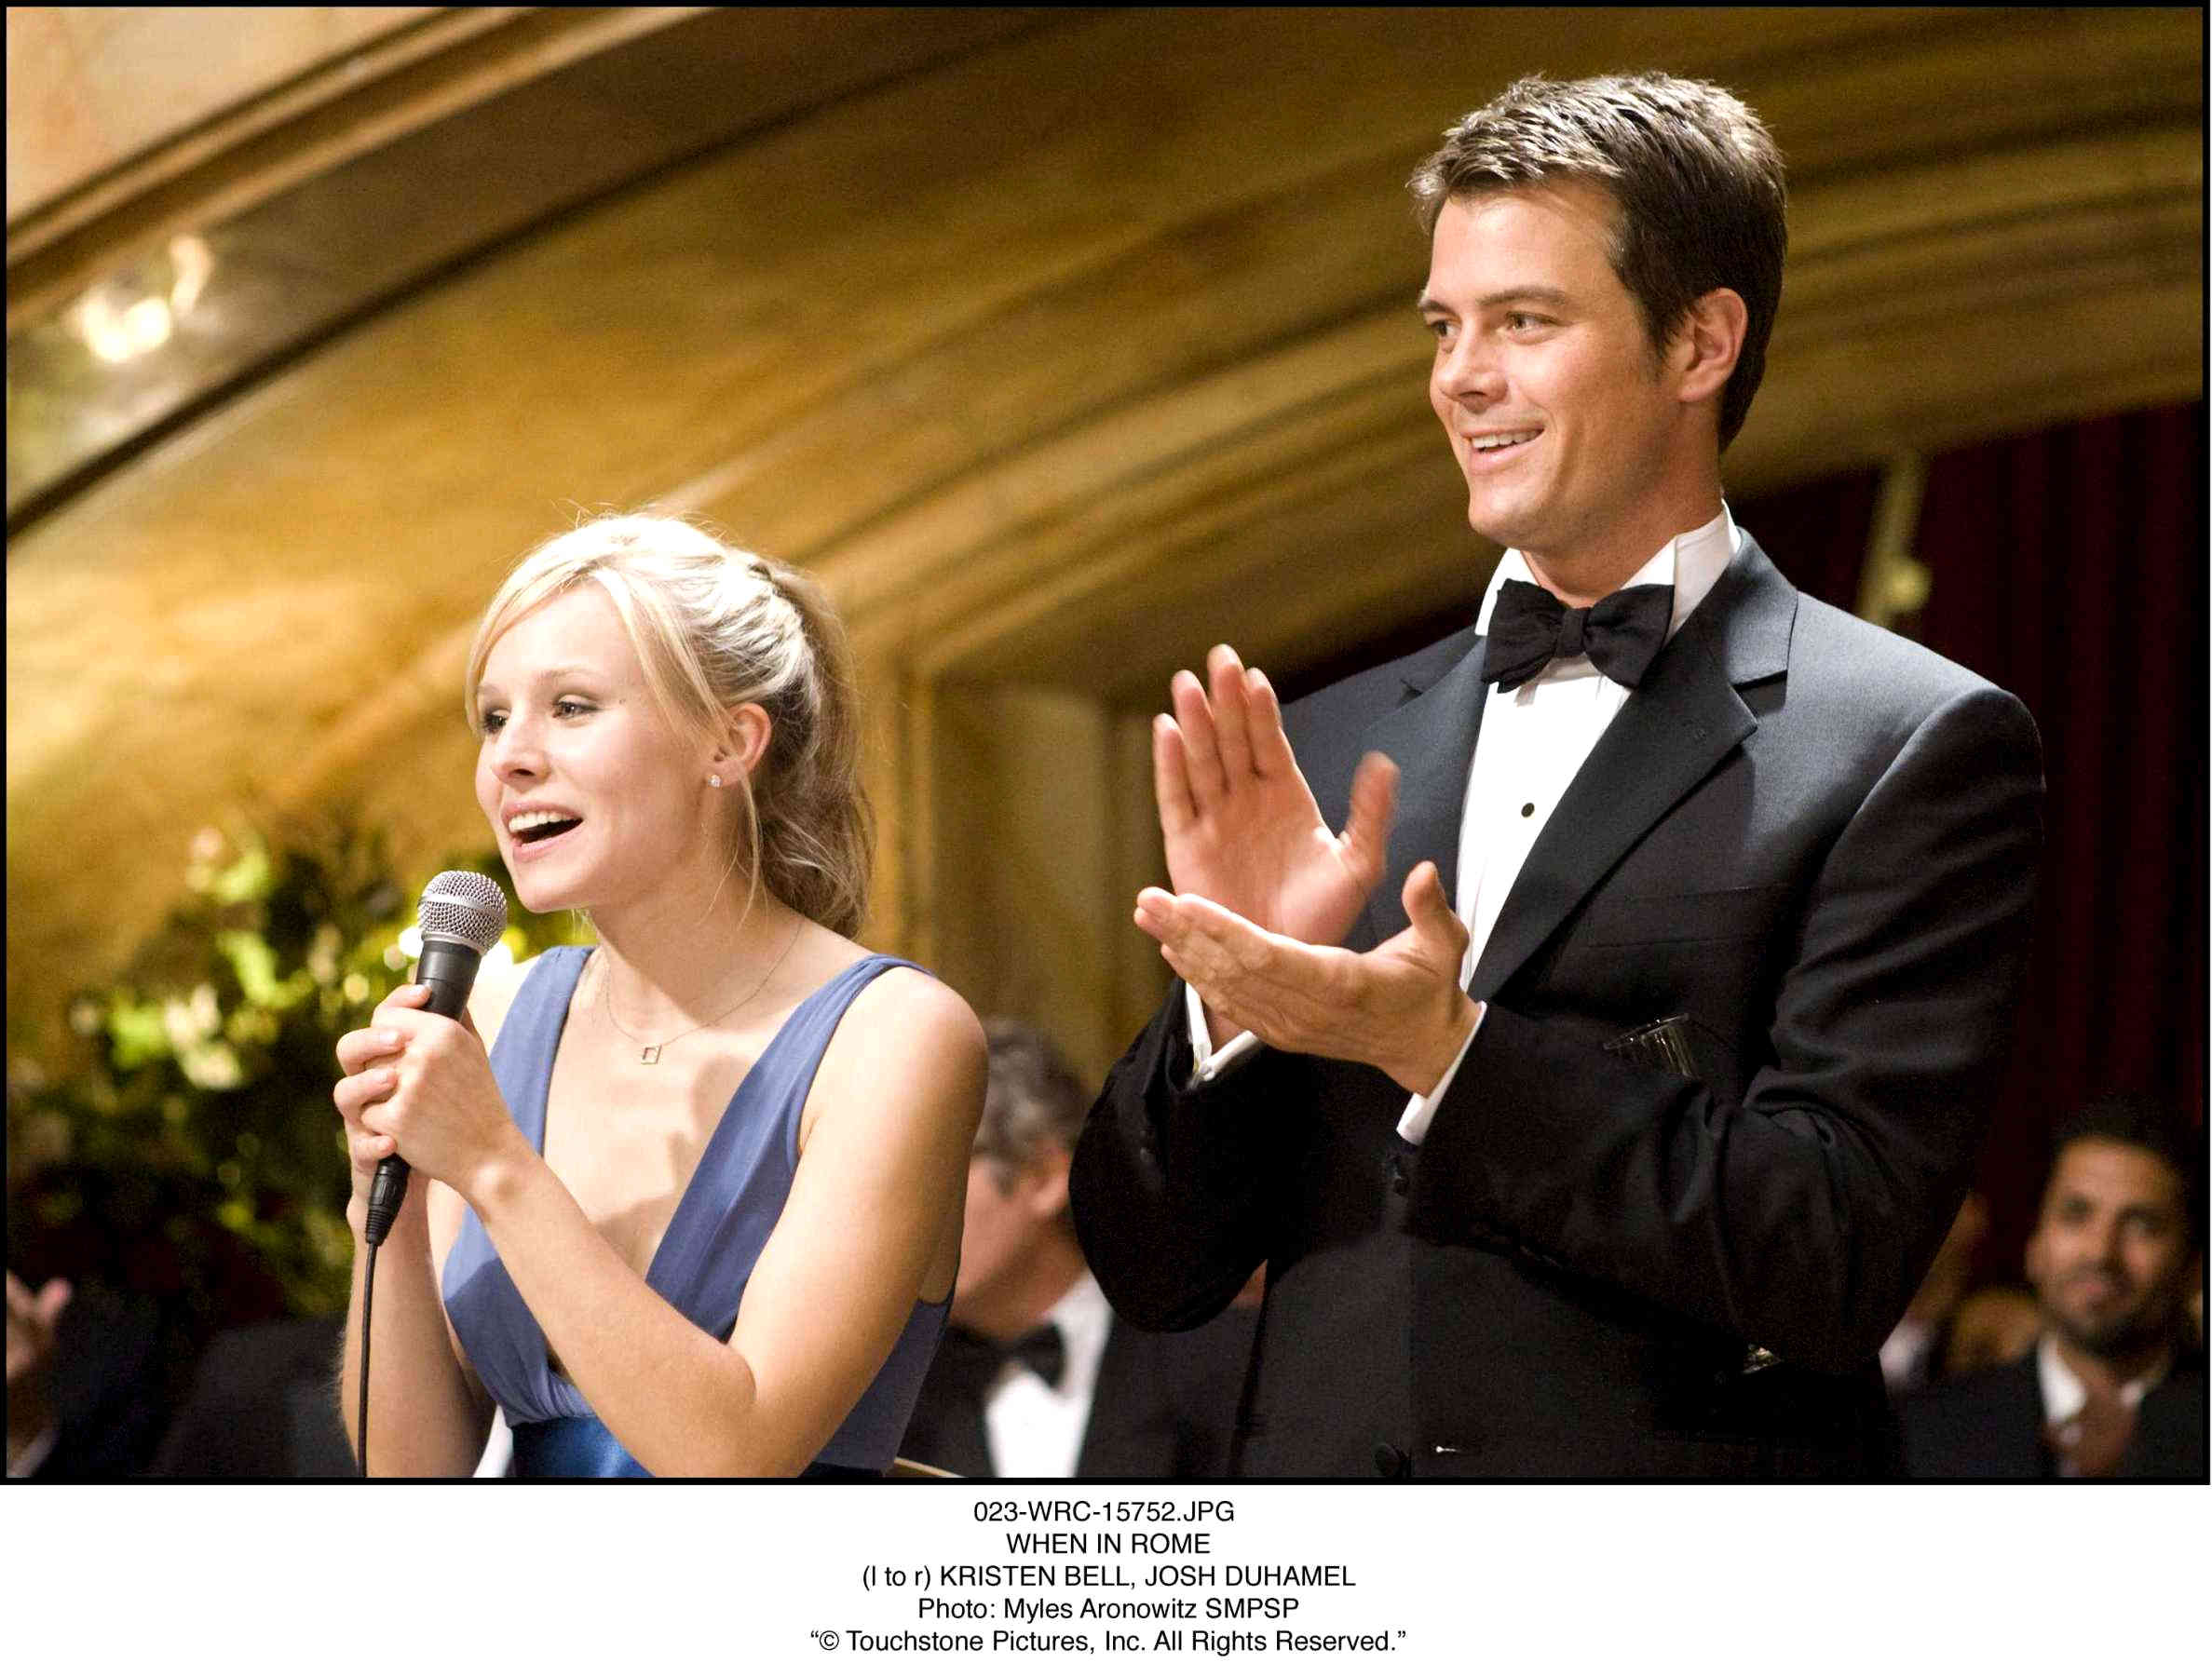 Kristen Bell stars as Beth Harper and Josh Duhamel stars as Nick Beamon in Walt Disney Pictures' When in Rome (2010). Photo credit by Myles Aronowitz.